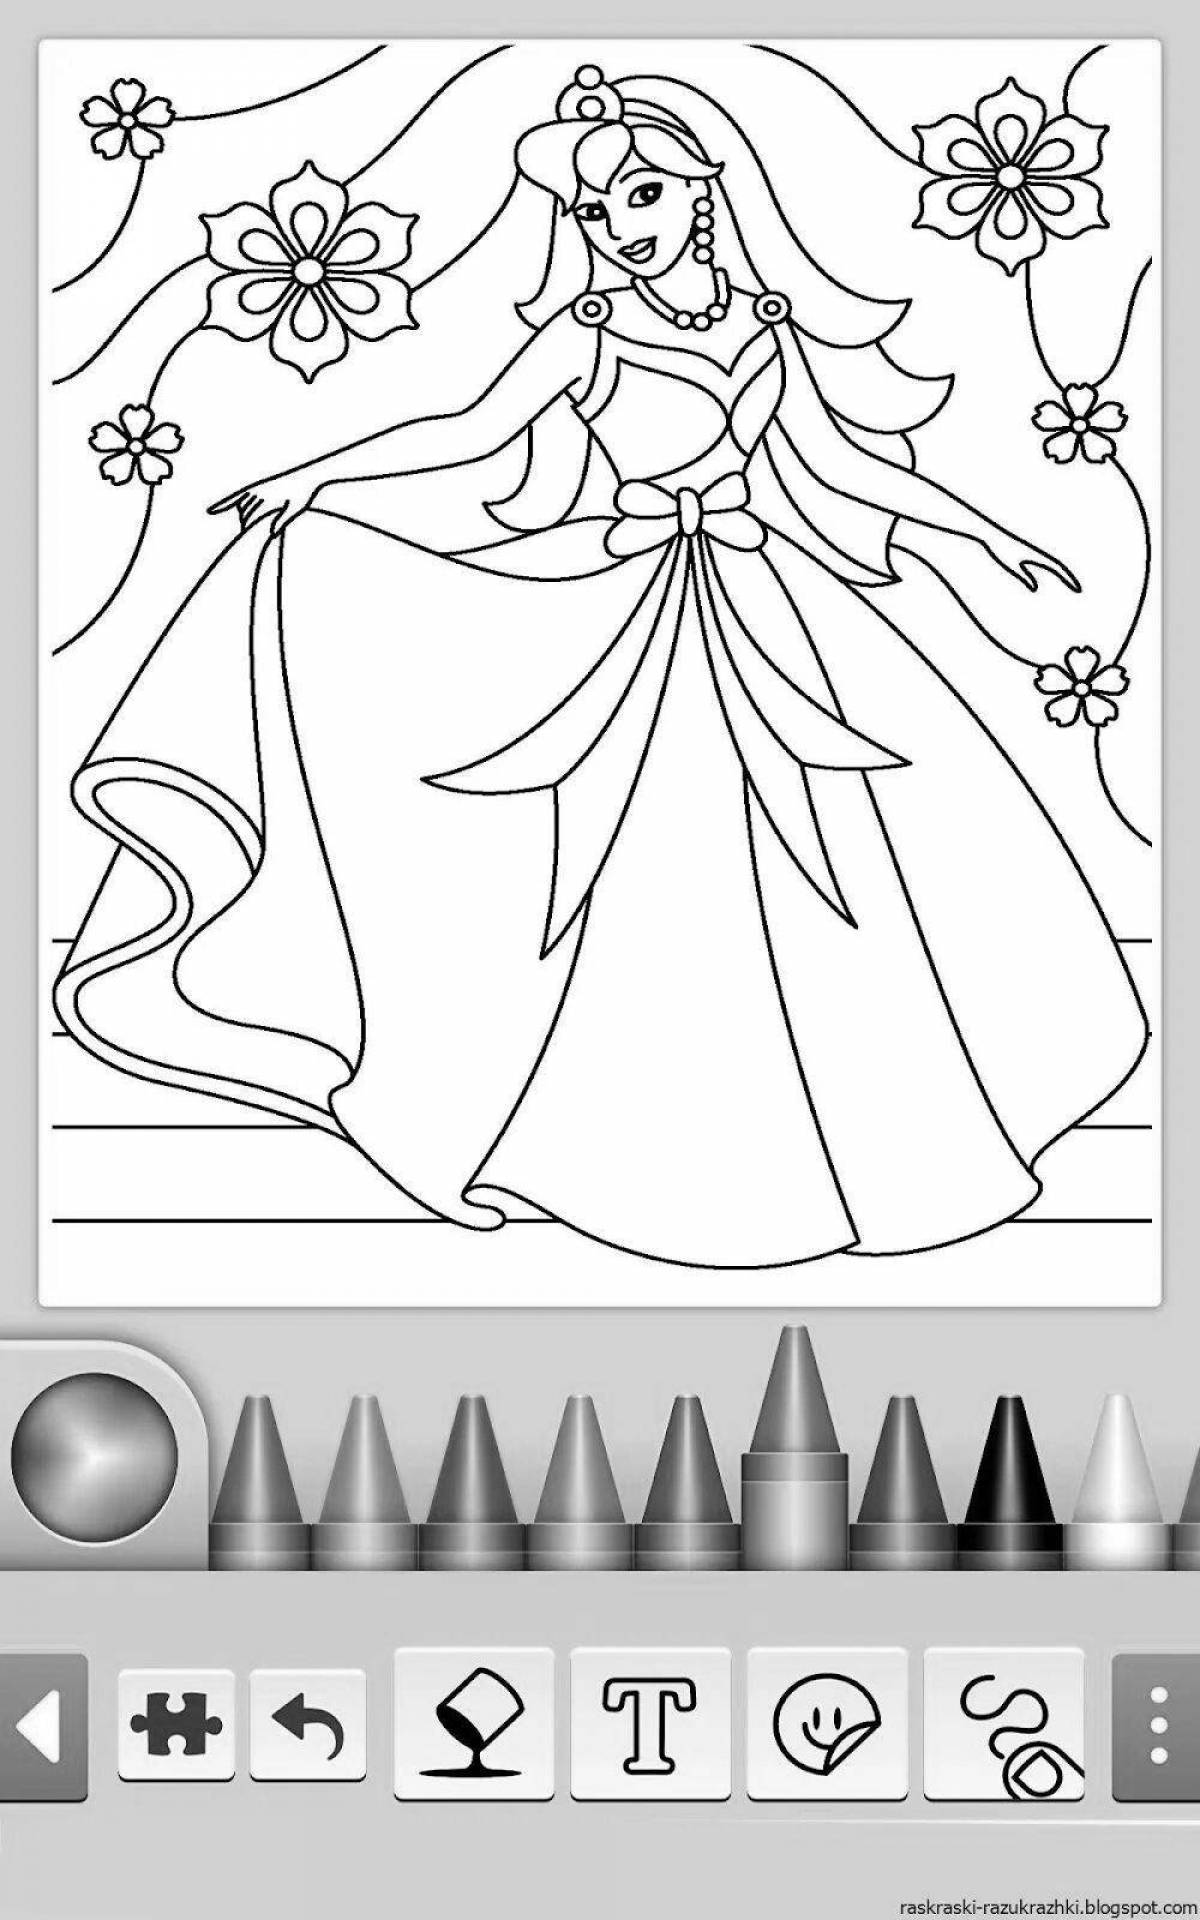 Great coloring game for girls 4-5 years old